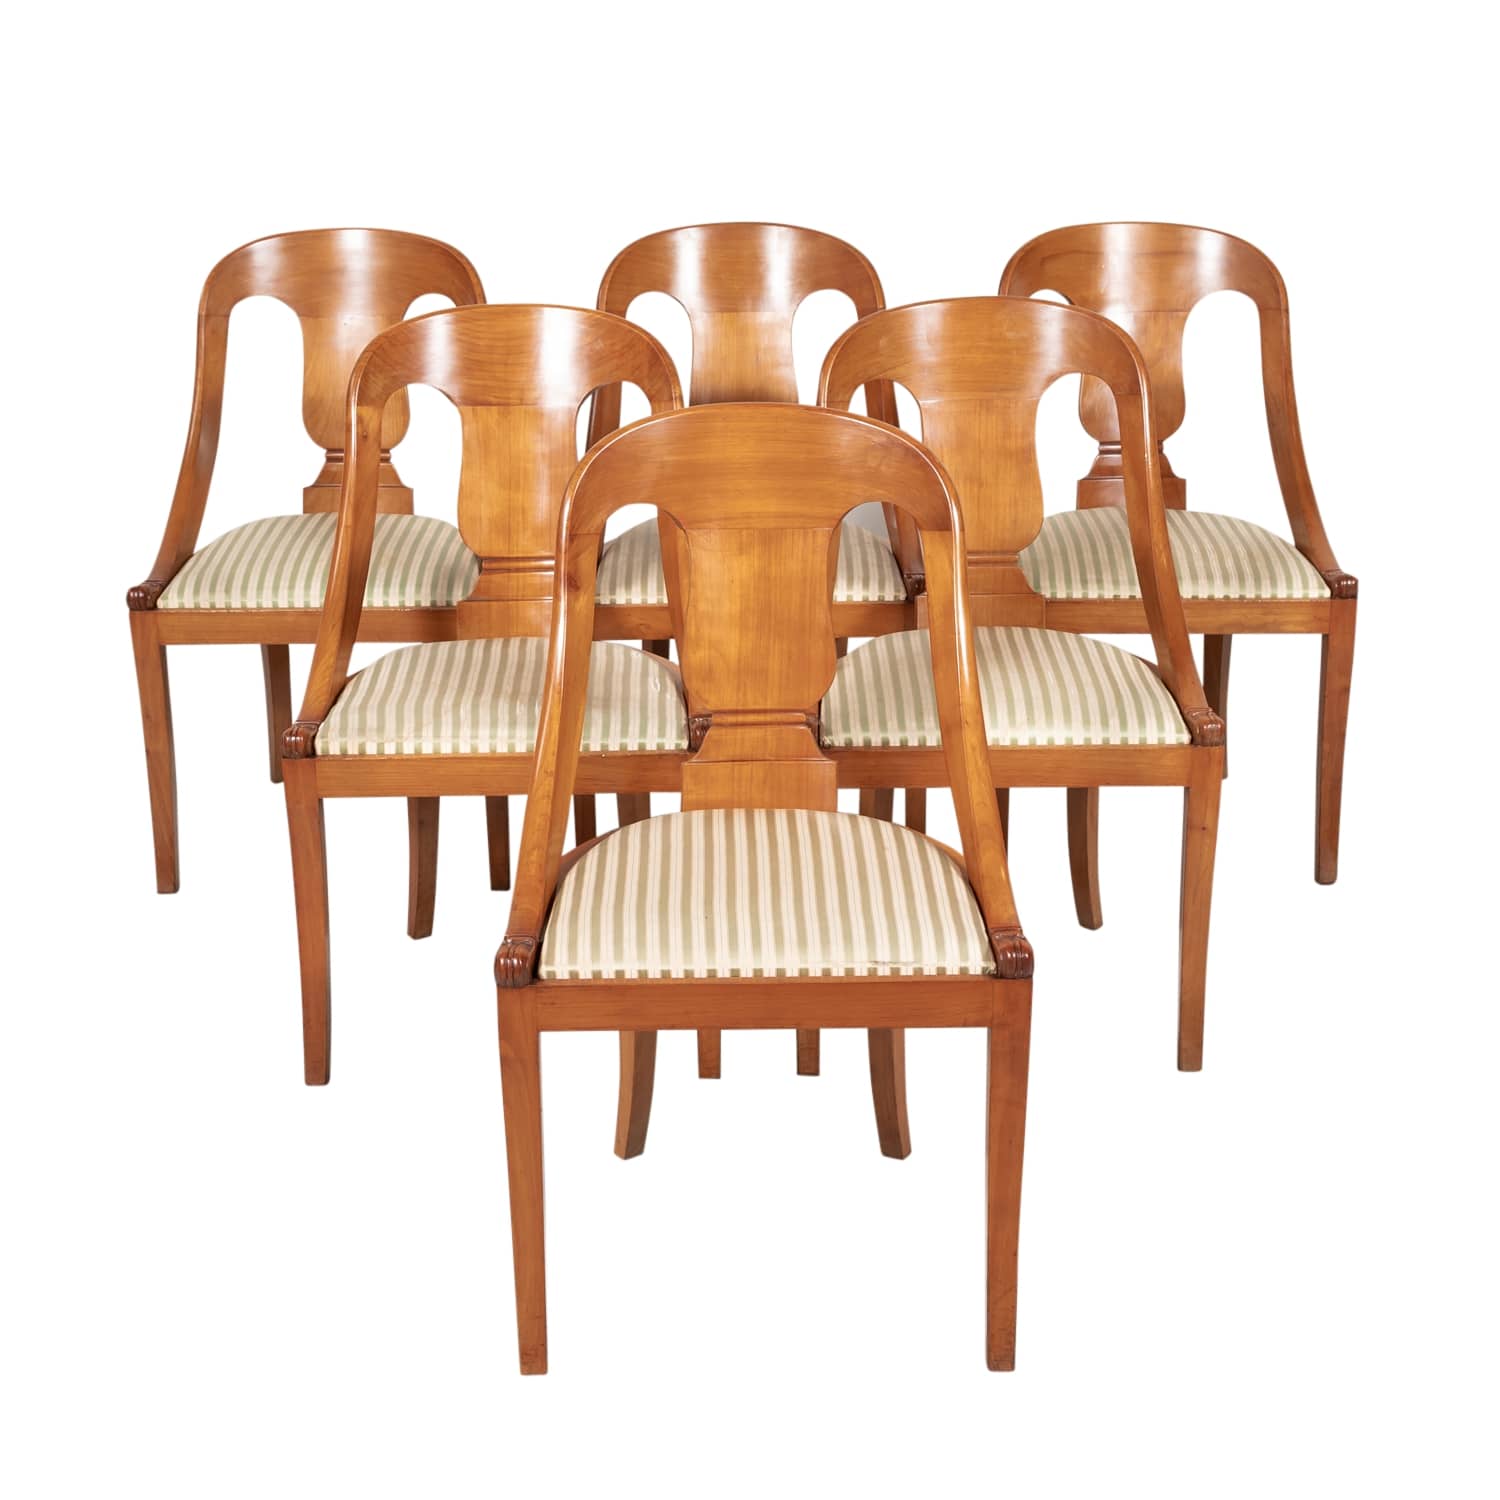 Antique French Empire Style Gondola, Empire Dining Chairs